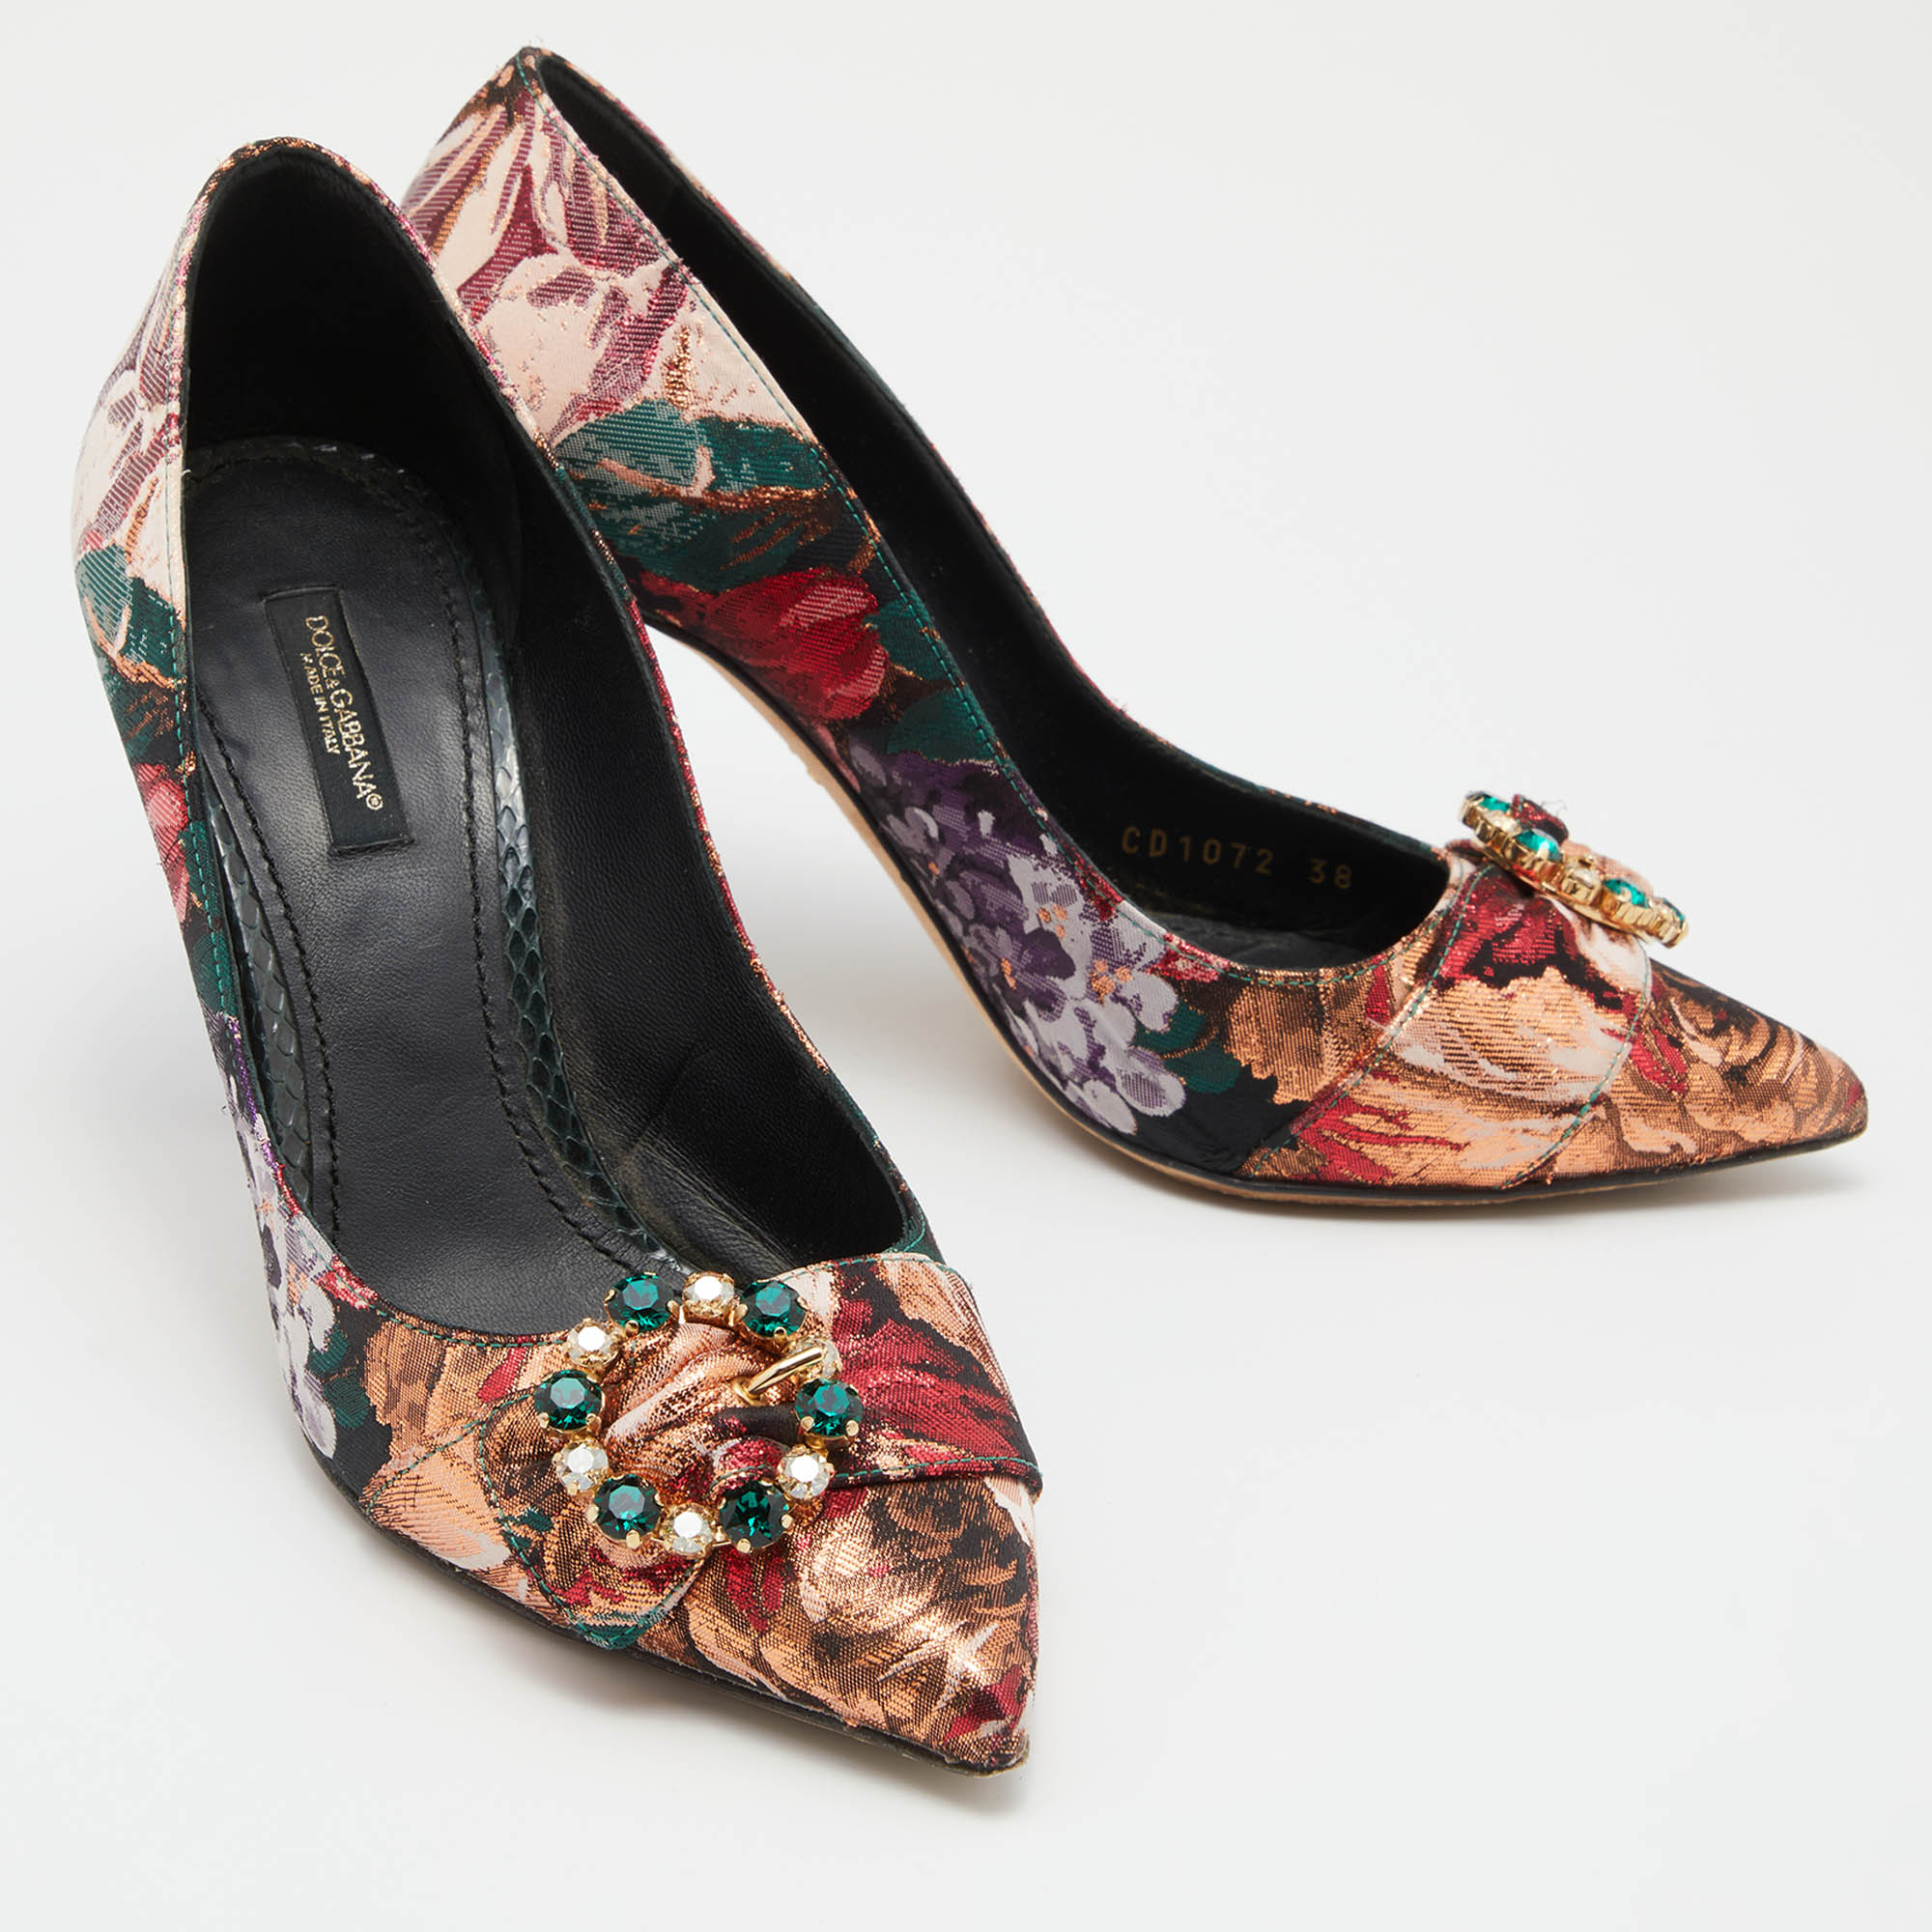 Dolce & Gabbana Multicolor Floral Fabric And Water Snake Leather Crystal Embellished Bellucci Pumps Size 38